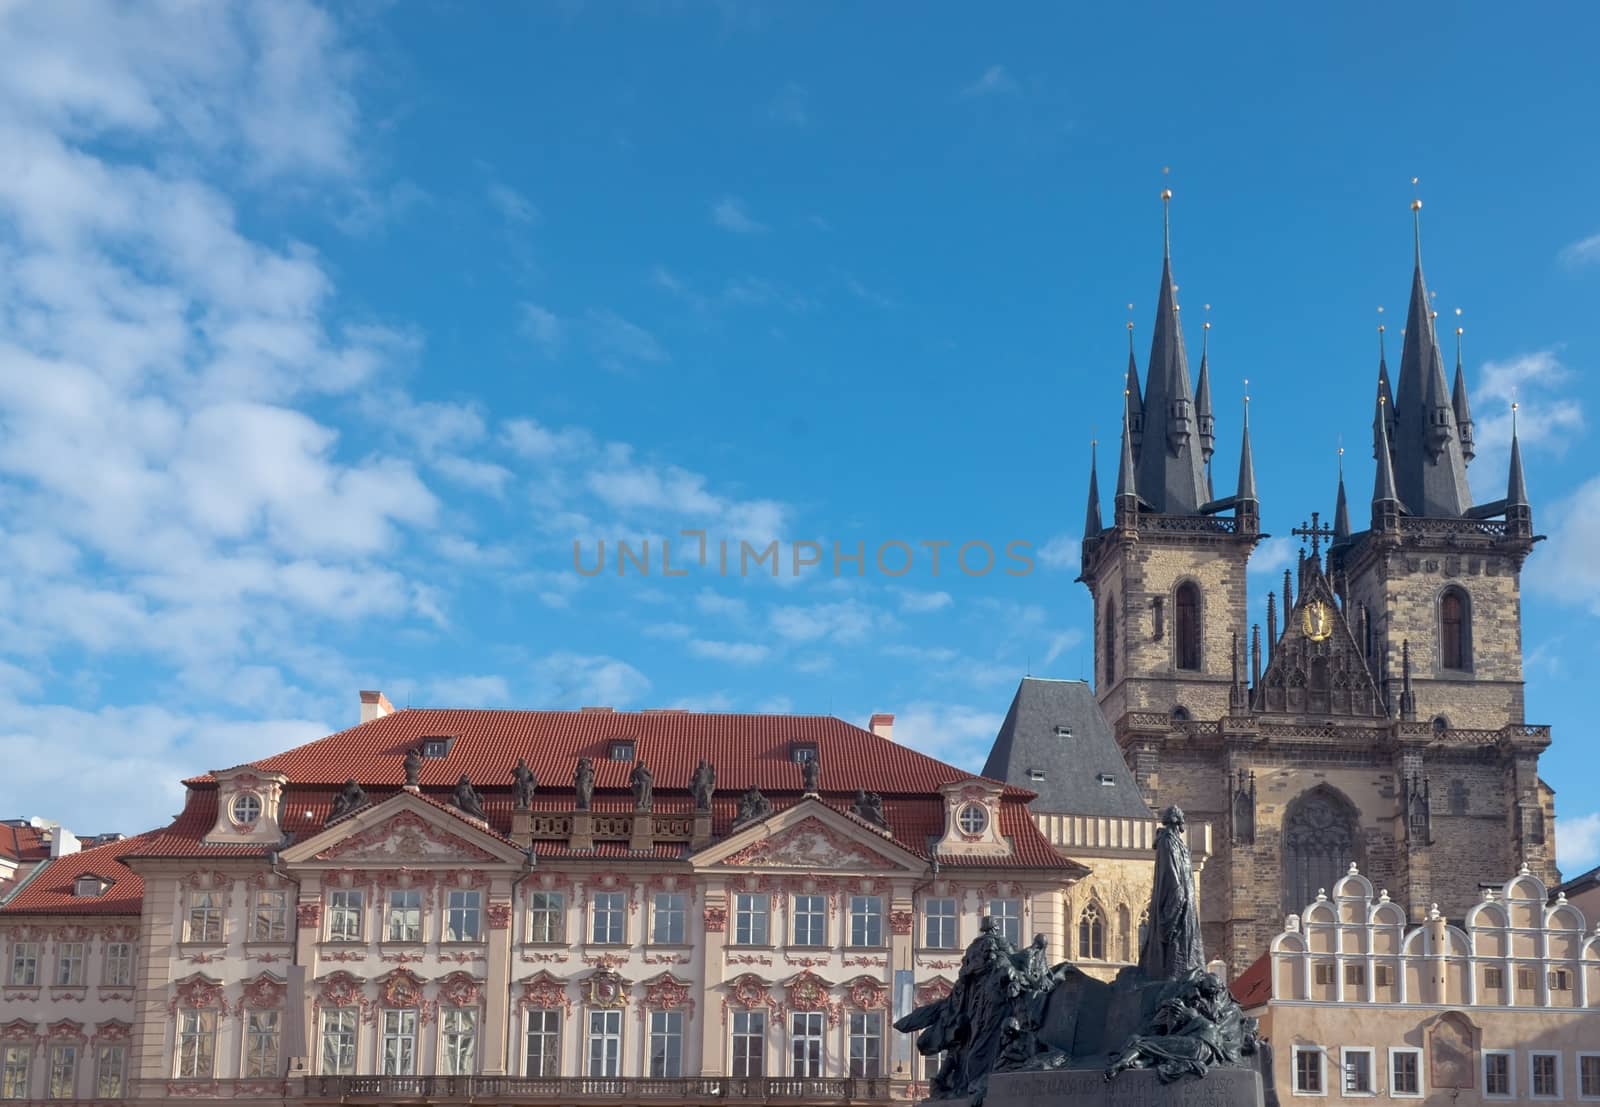 View of the Old Town Square and the monument to Jan Hus in Prague.